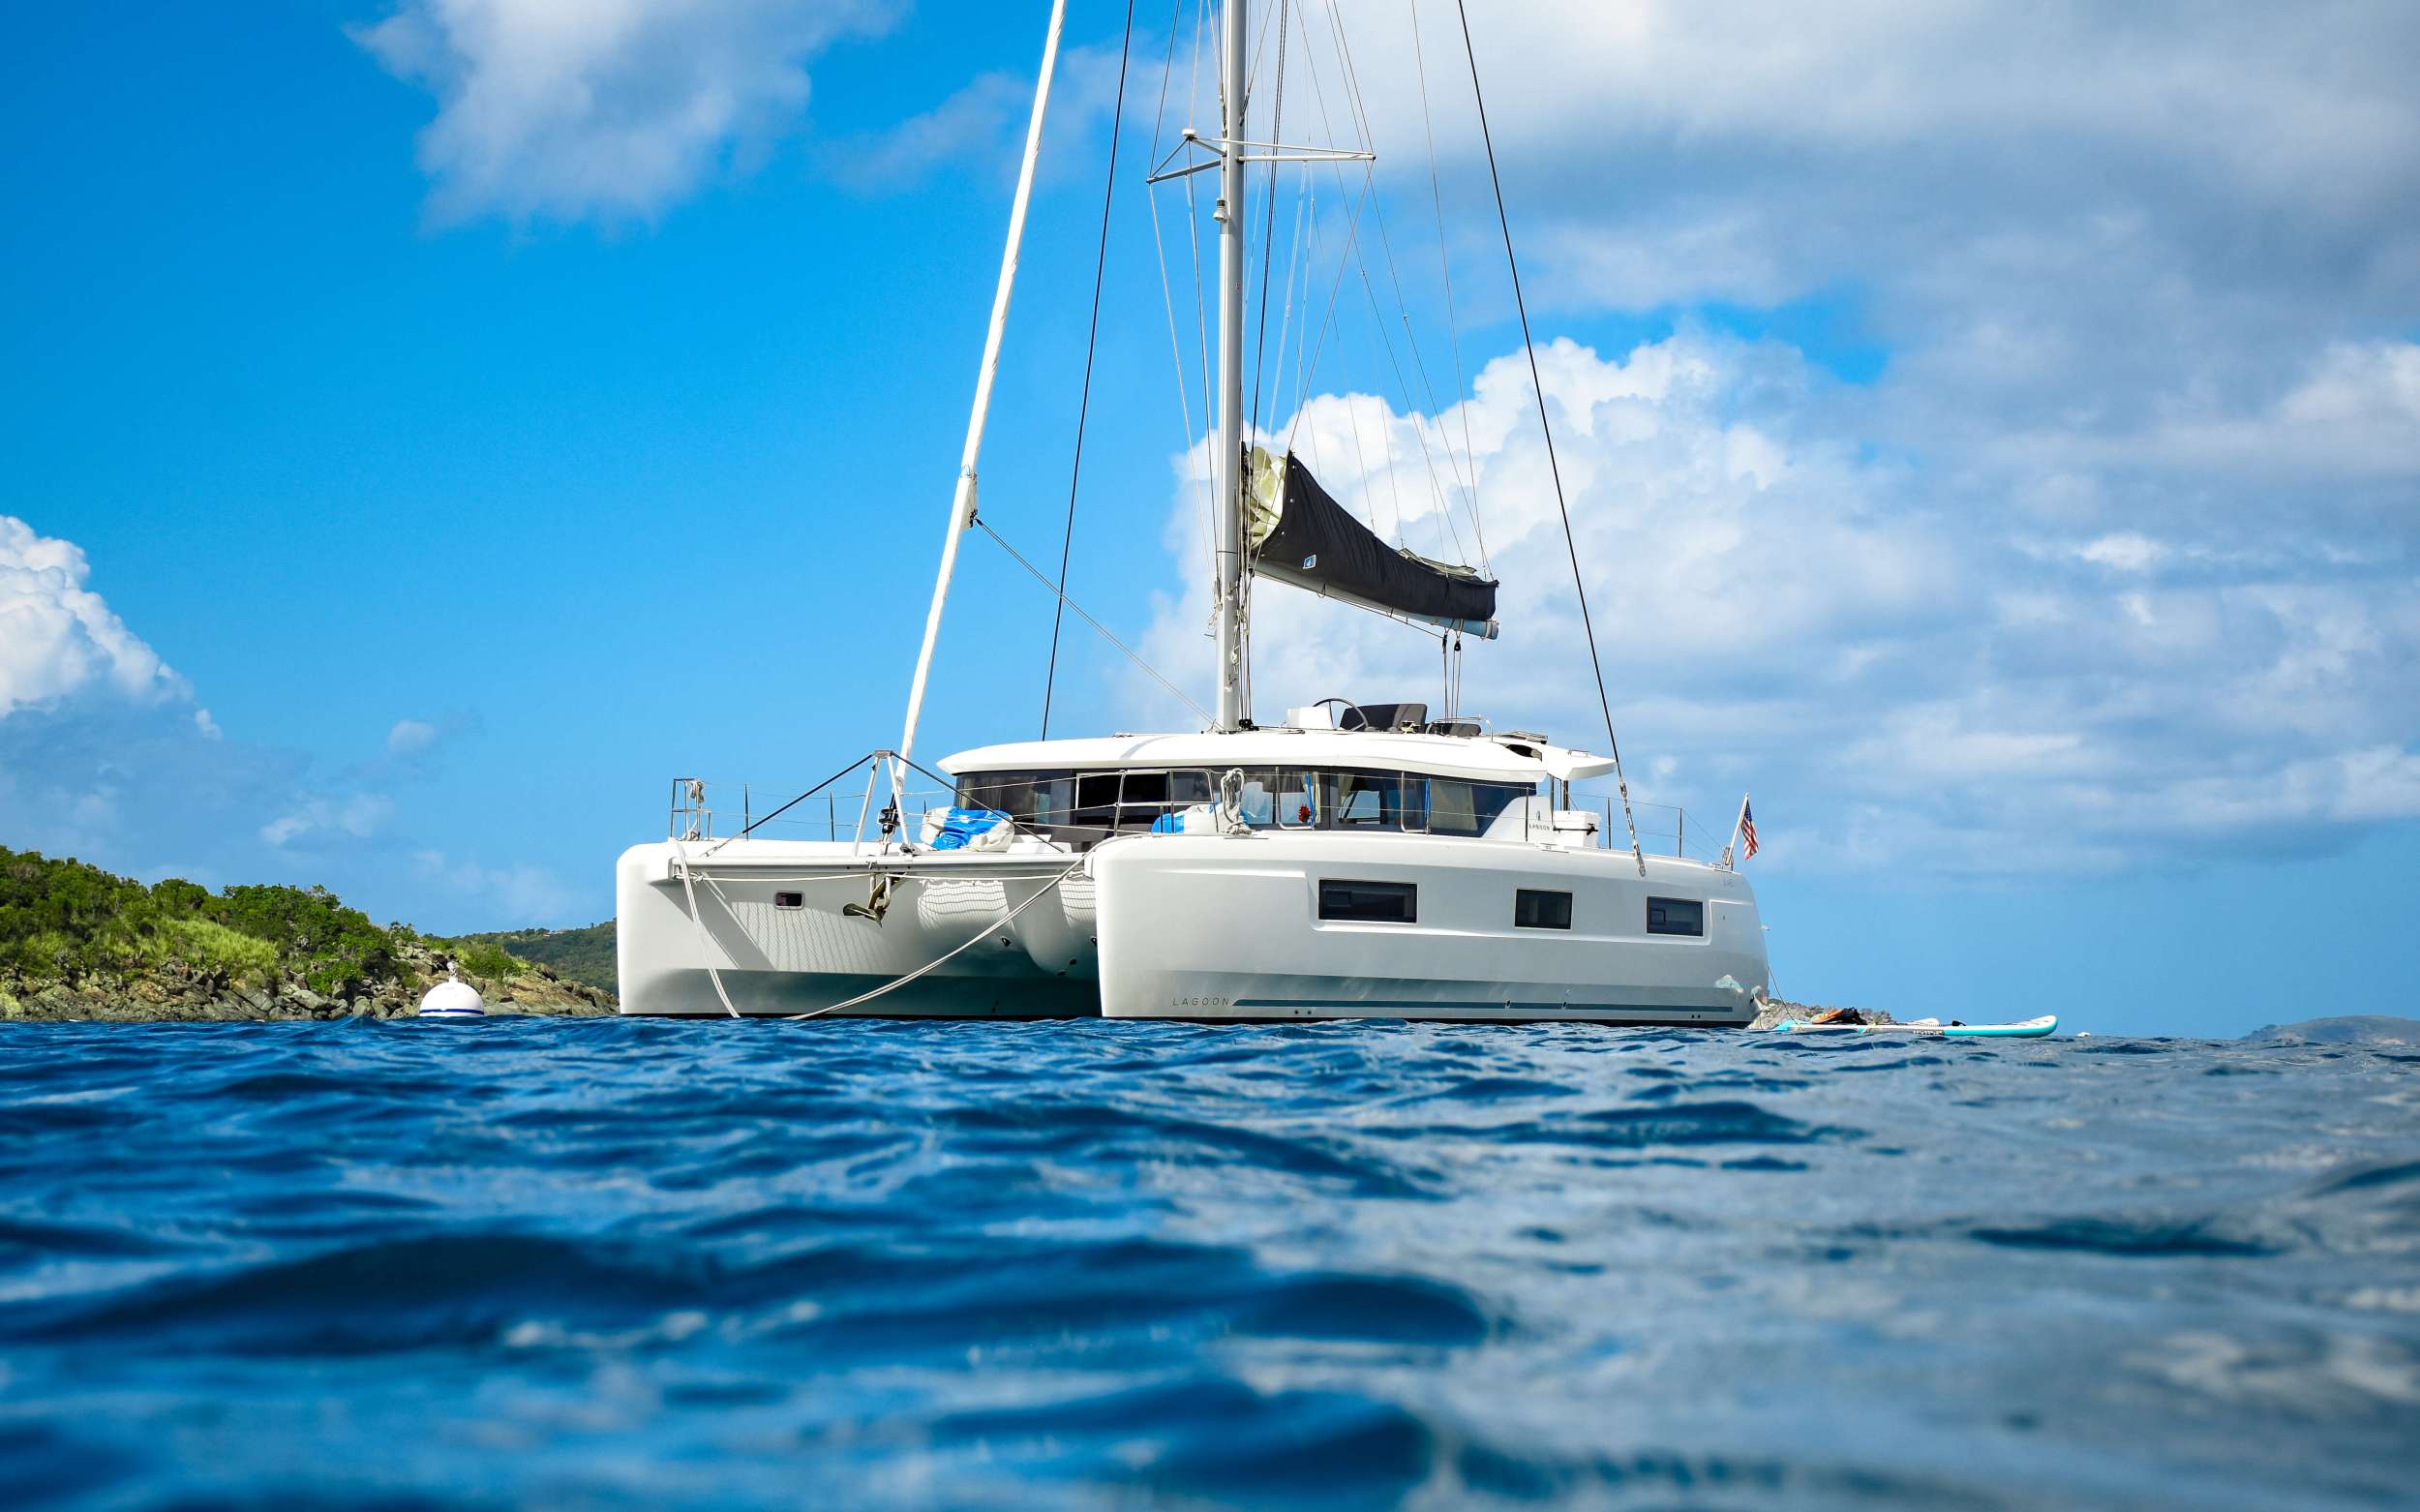 CELAVIE - Yacht Charter Netherlands Antilles & Boat hire in Caribbean 2